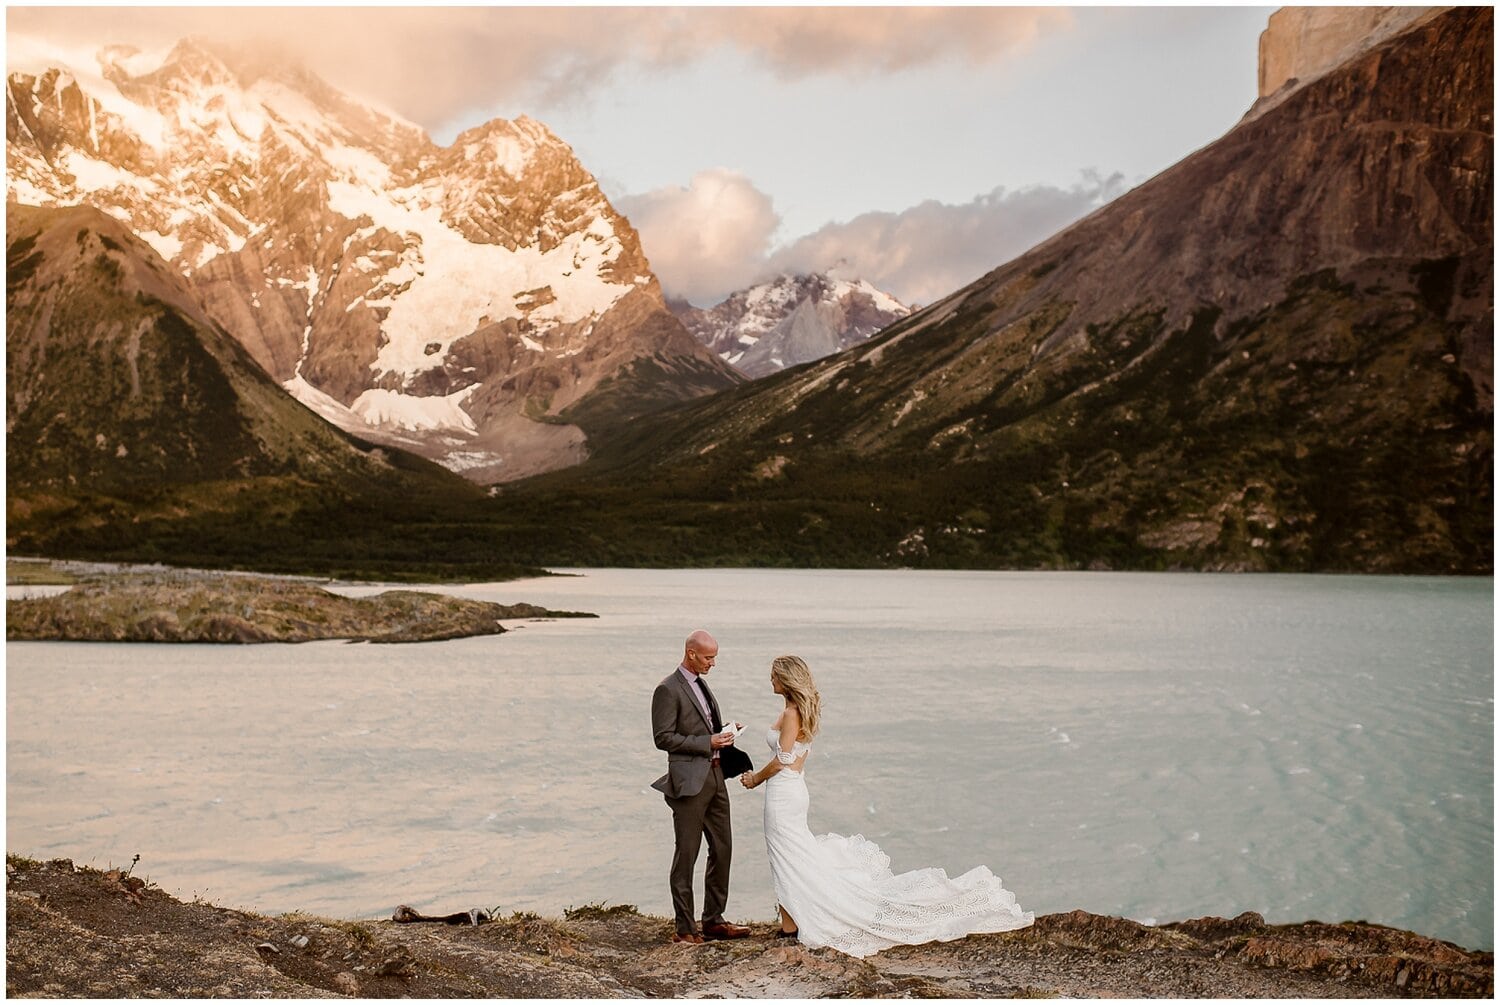 Groom reads his vows to bride in front of a blue alpine lake, with snow covered mountains behind them. 